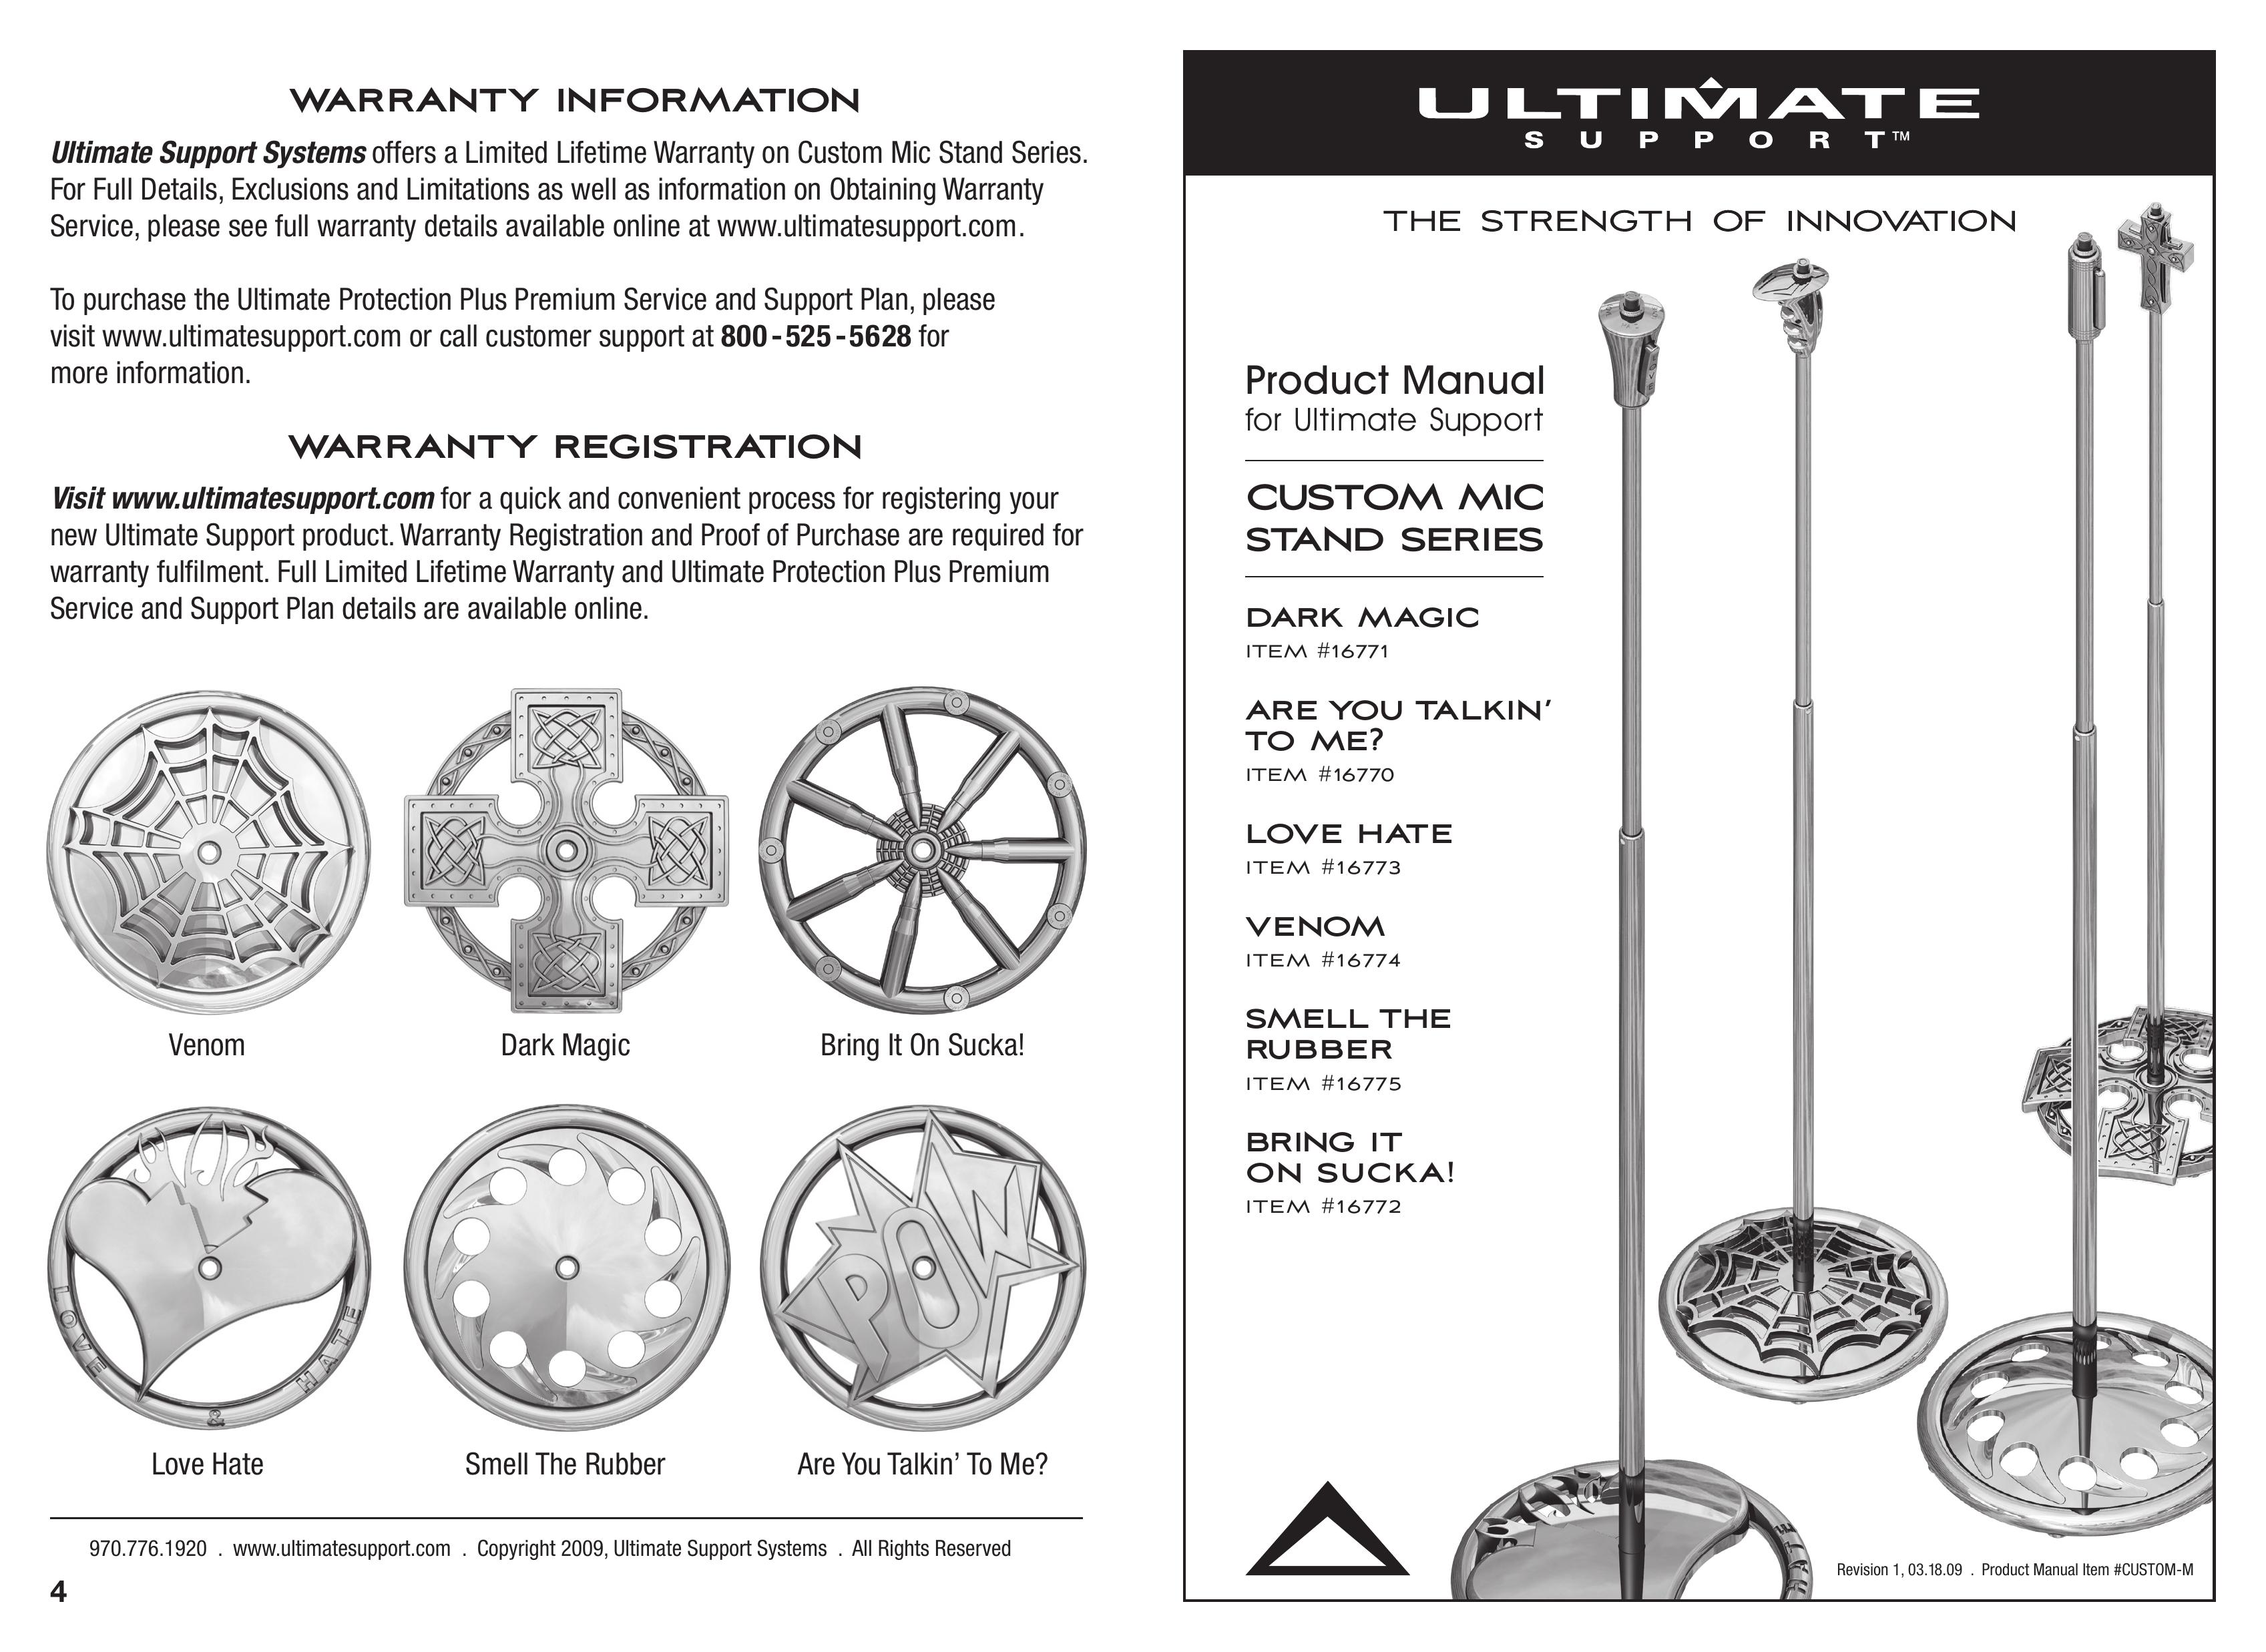 Ultimate Support Systems 16773 Microphone User Manual